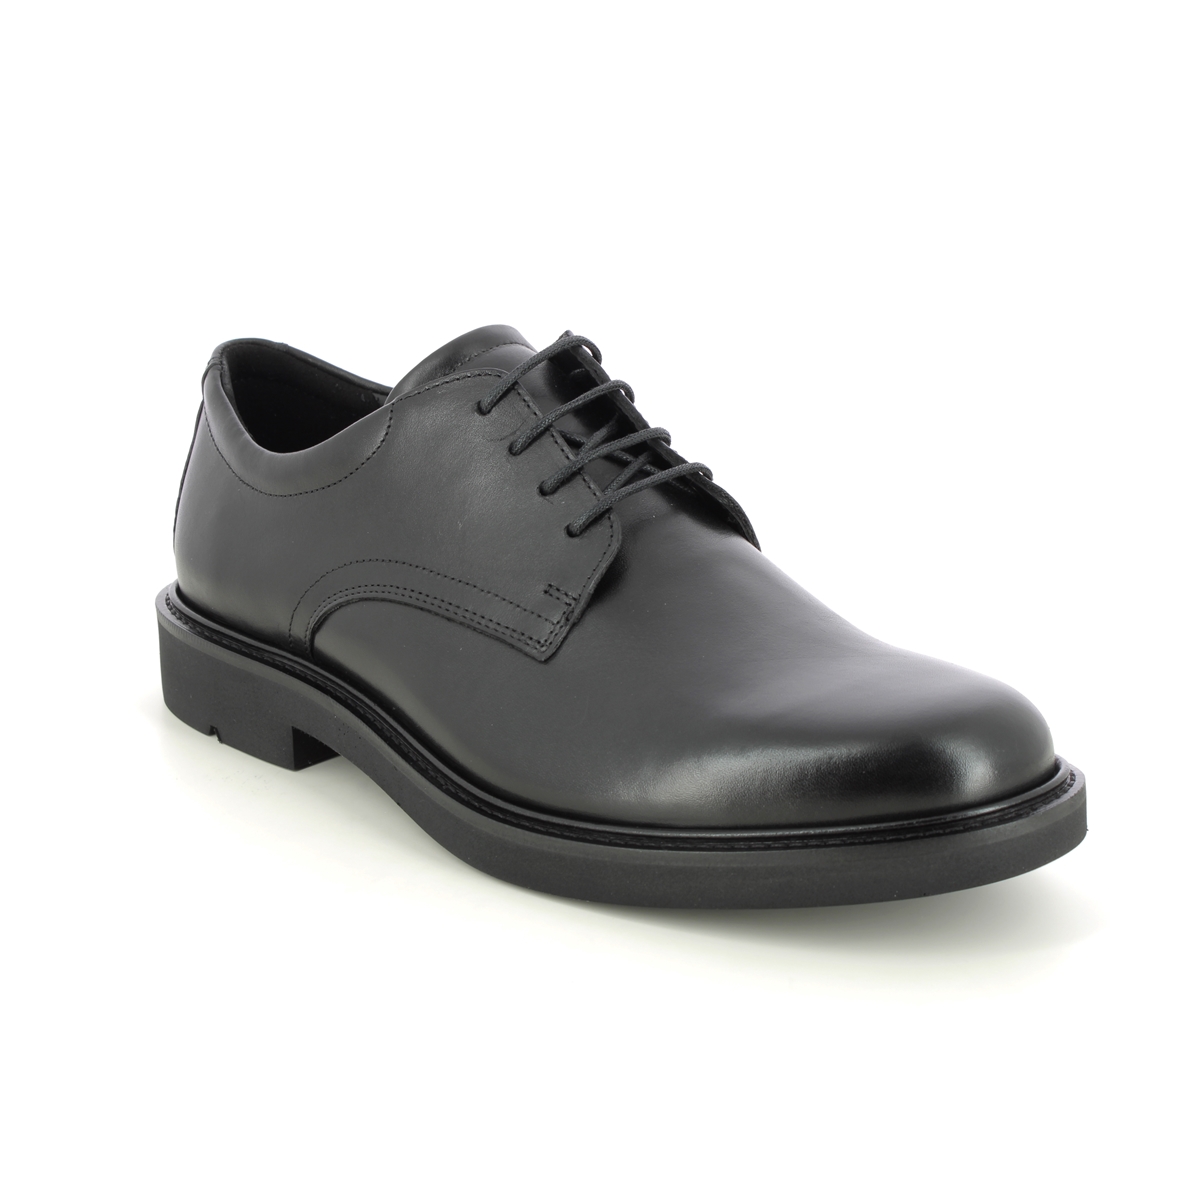 Ecco London Metropole Black Leather Mens Formal Shoes 525604-01001 In Size 46 In Plain Black Leather